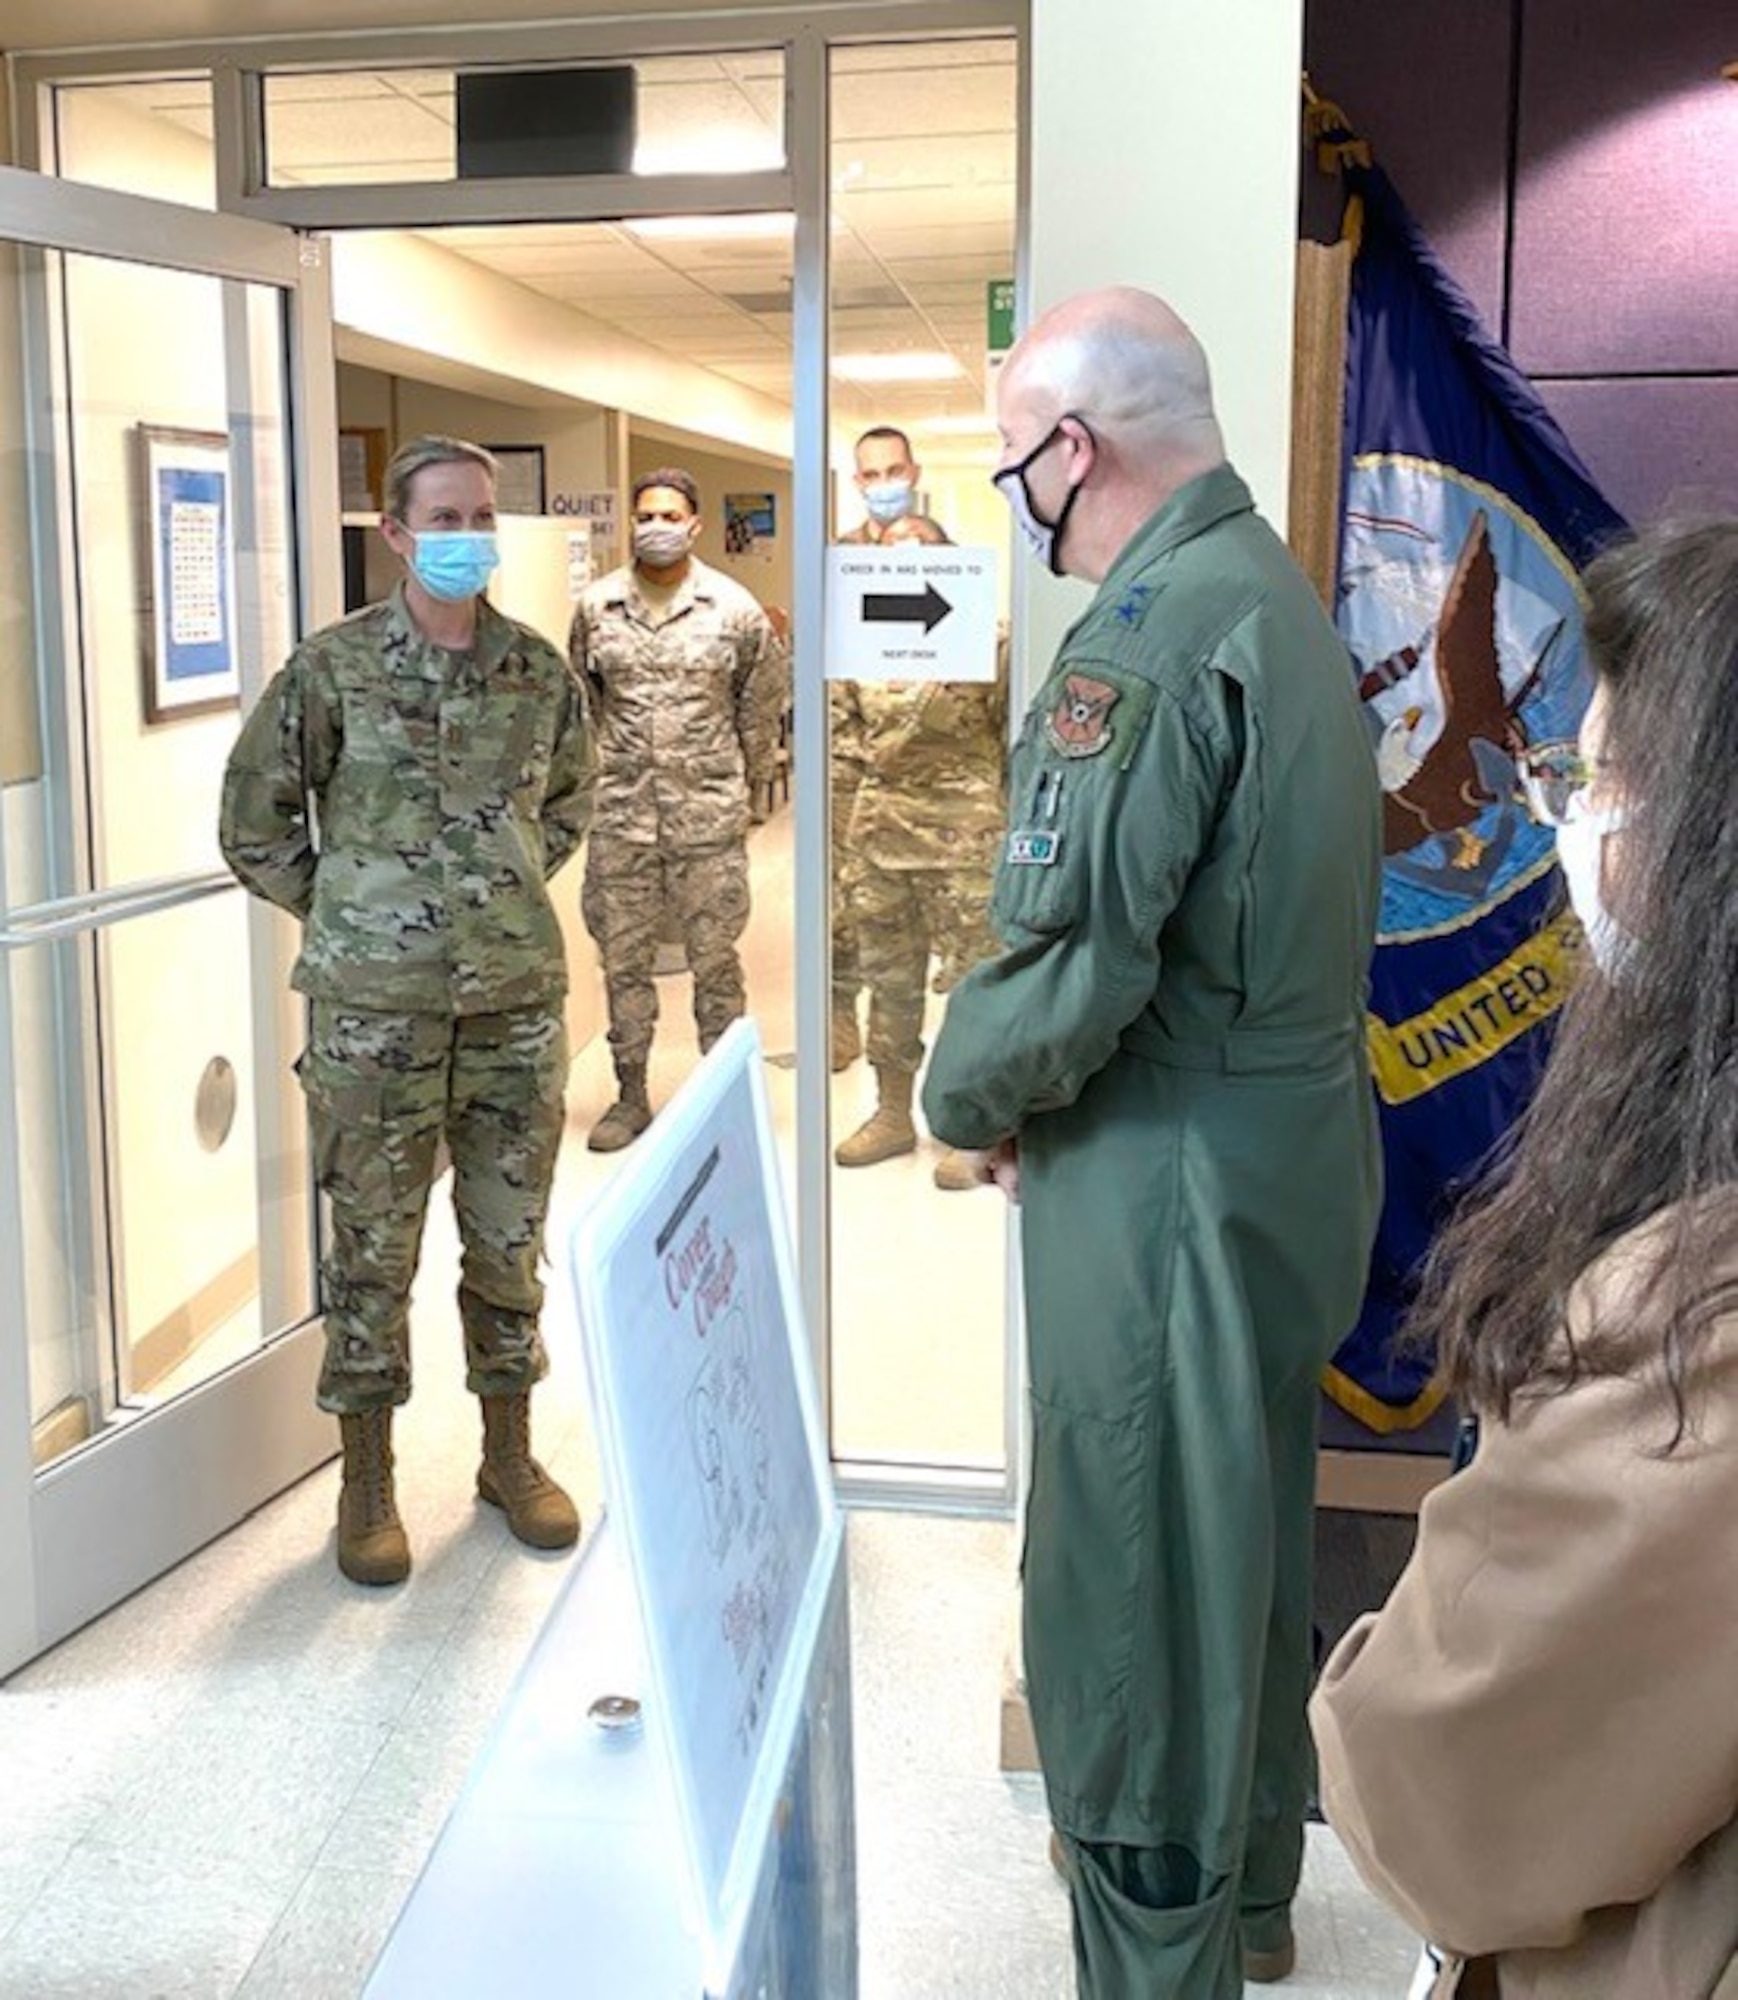 Maj. Gen. Brian Borgen, 10th Air Force commander, speaks with Capt. Lara Stahl, 301st Medical Squadron officer-in-charge of immunizations, during a visit to the wing on Feb. 6, 2021, at Naval Air Station Joint Reserve Base Fort Worth, Texas.